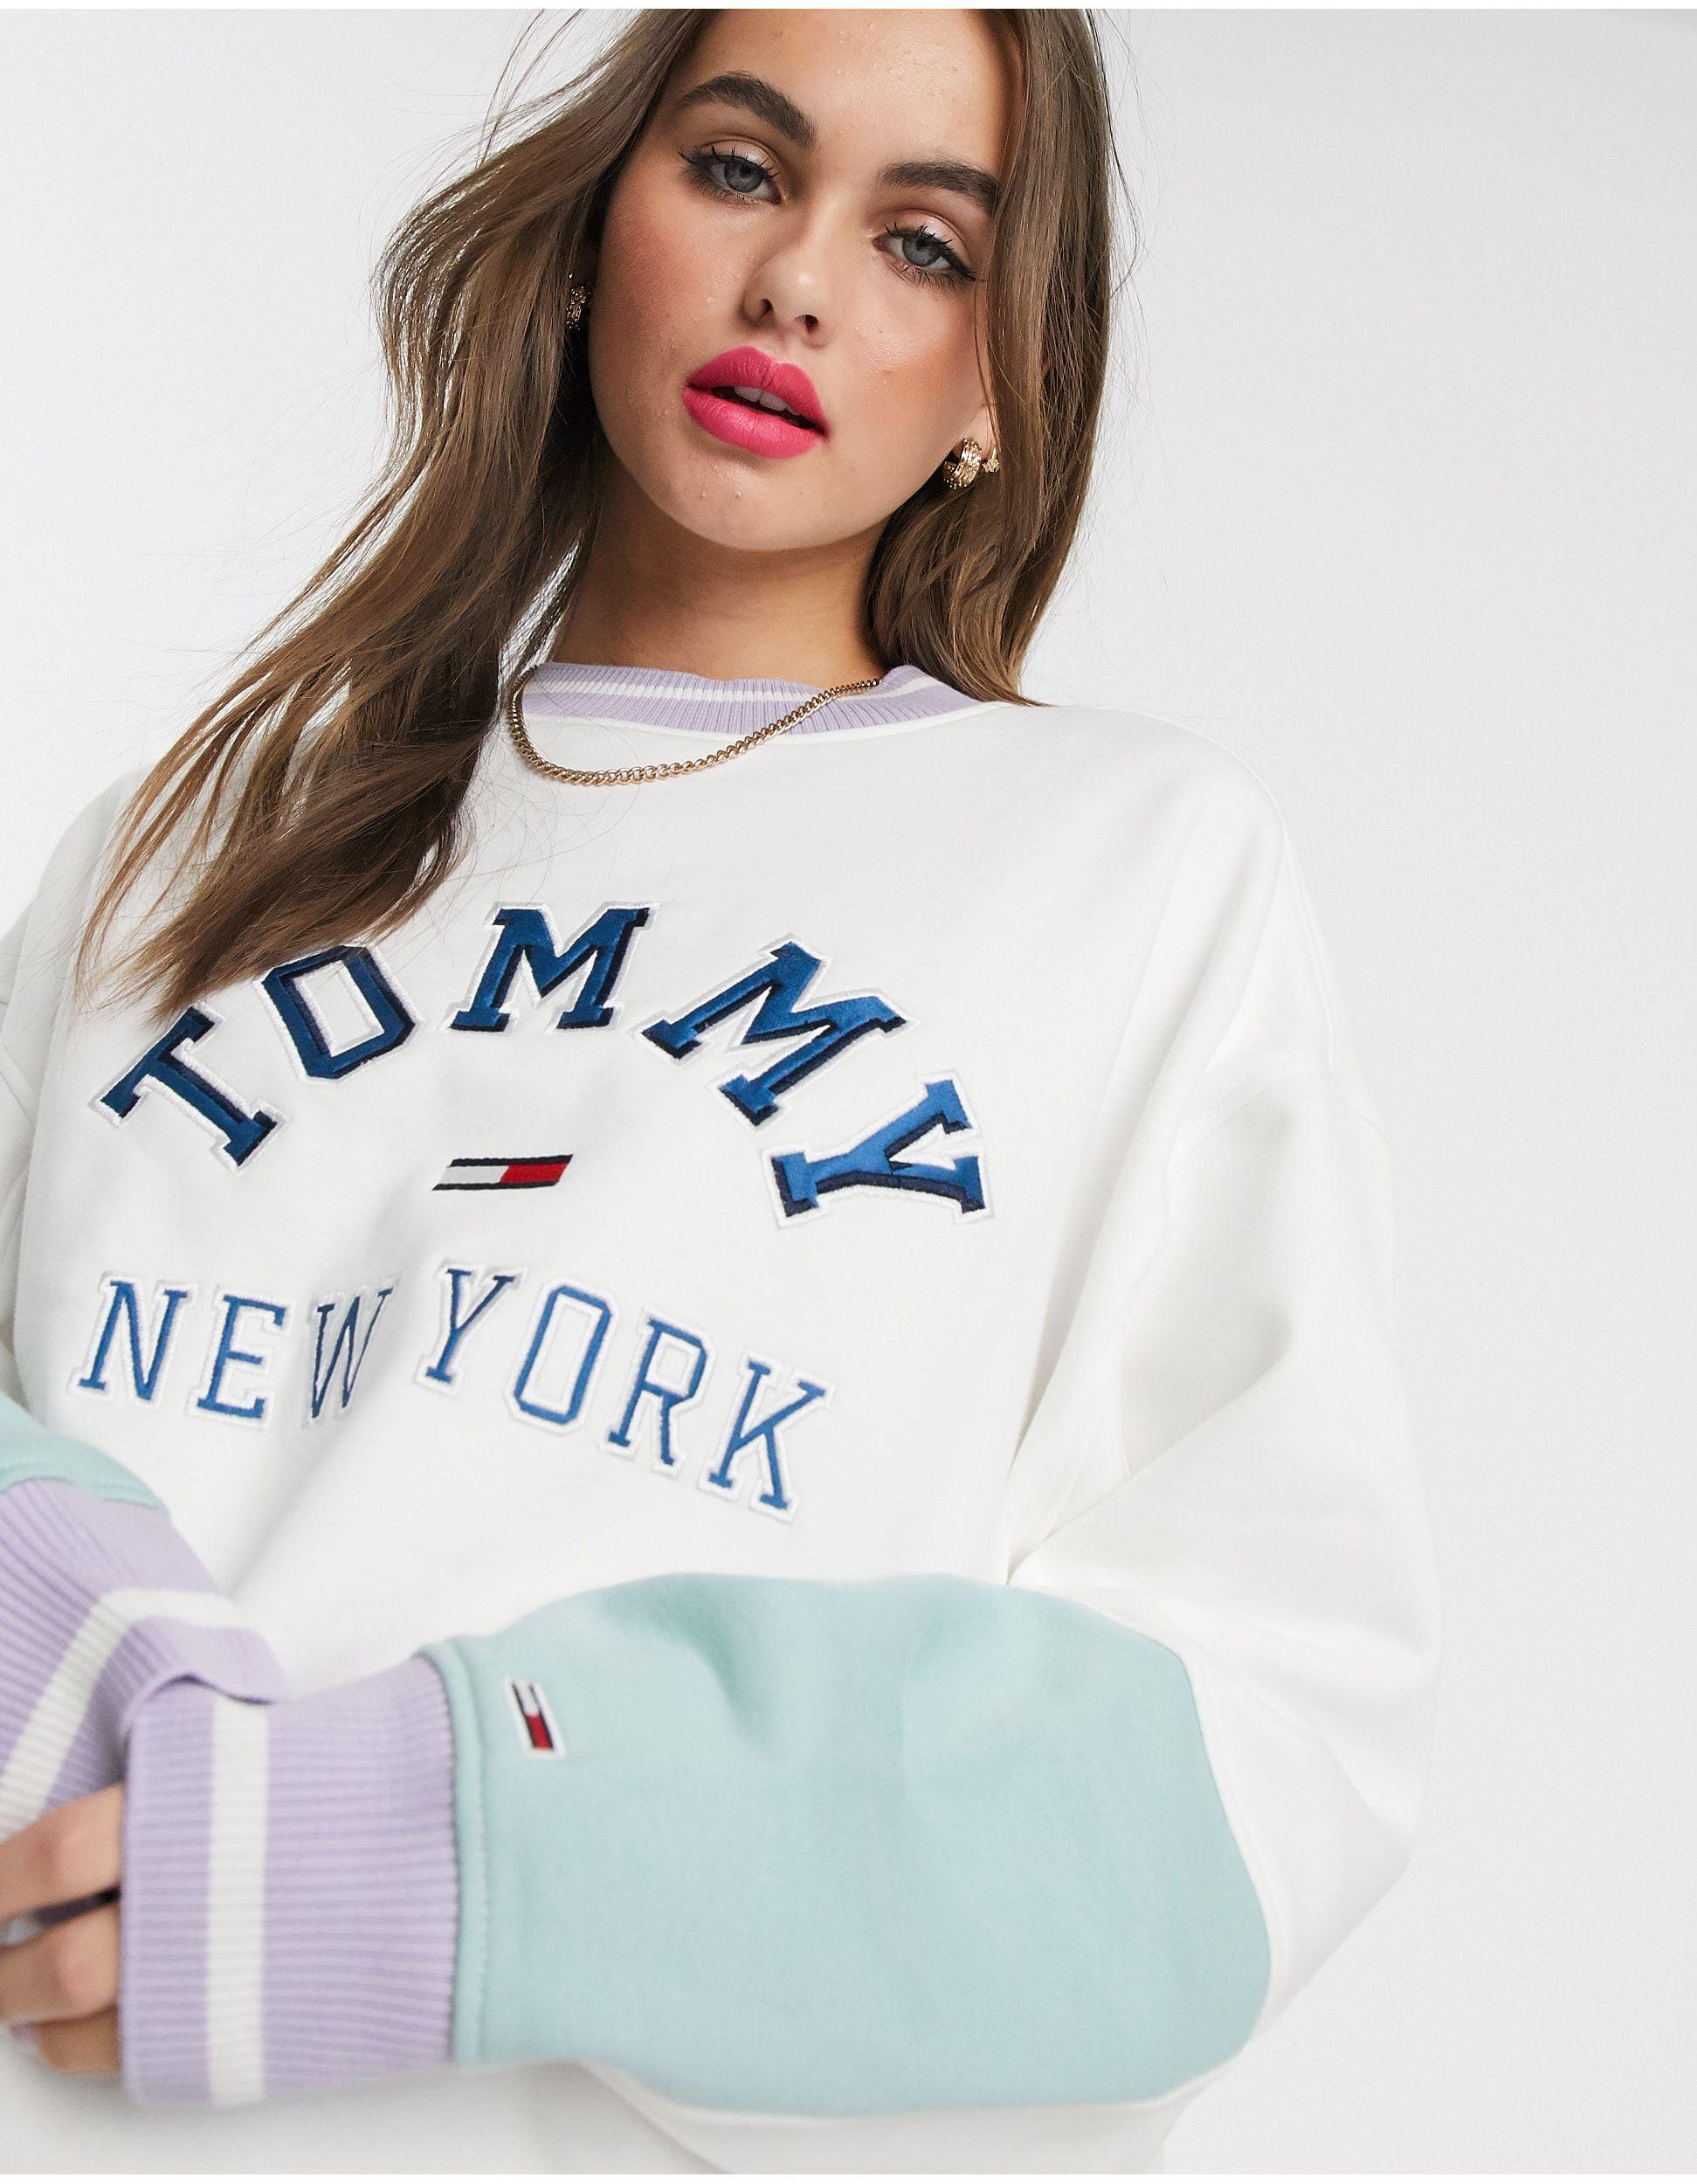 Tommy Hilfiger Pastel Colour Block Sweatshirt Top Sellers, UP TO 70% OFF |  www.apmusicales.com